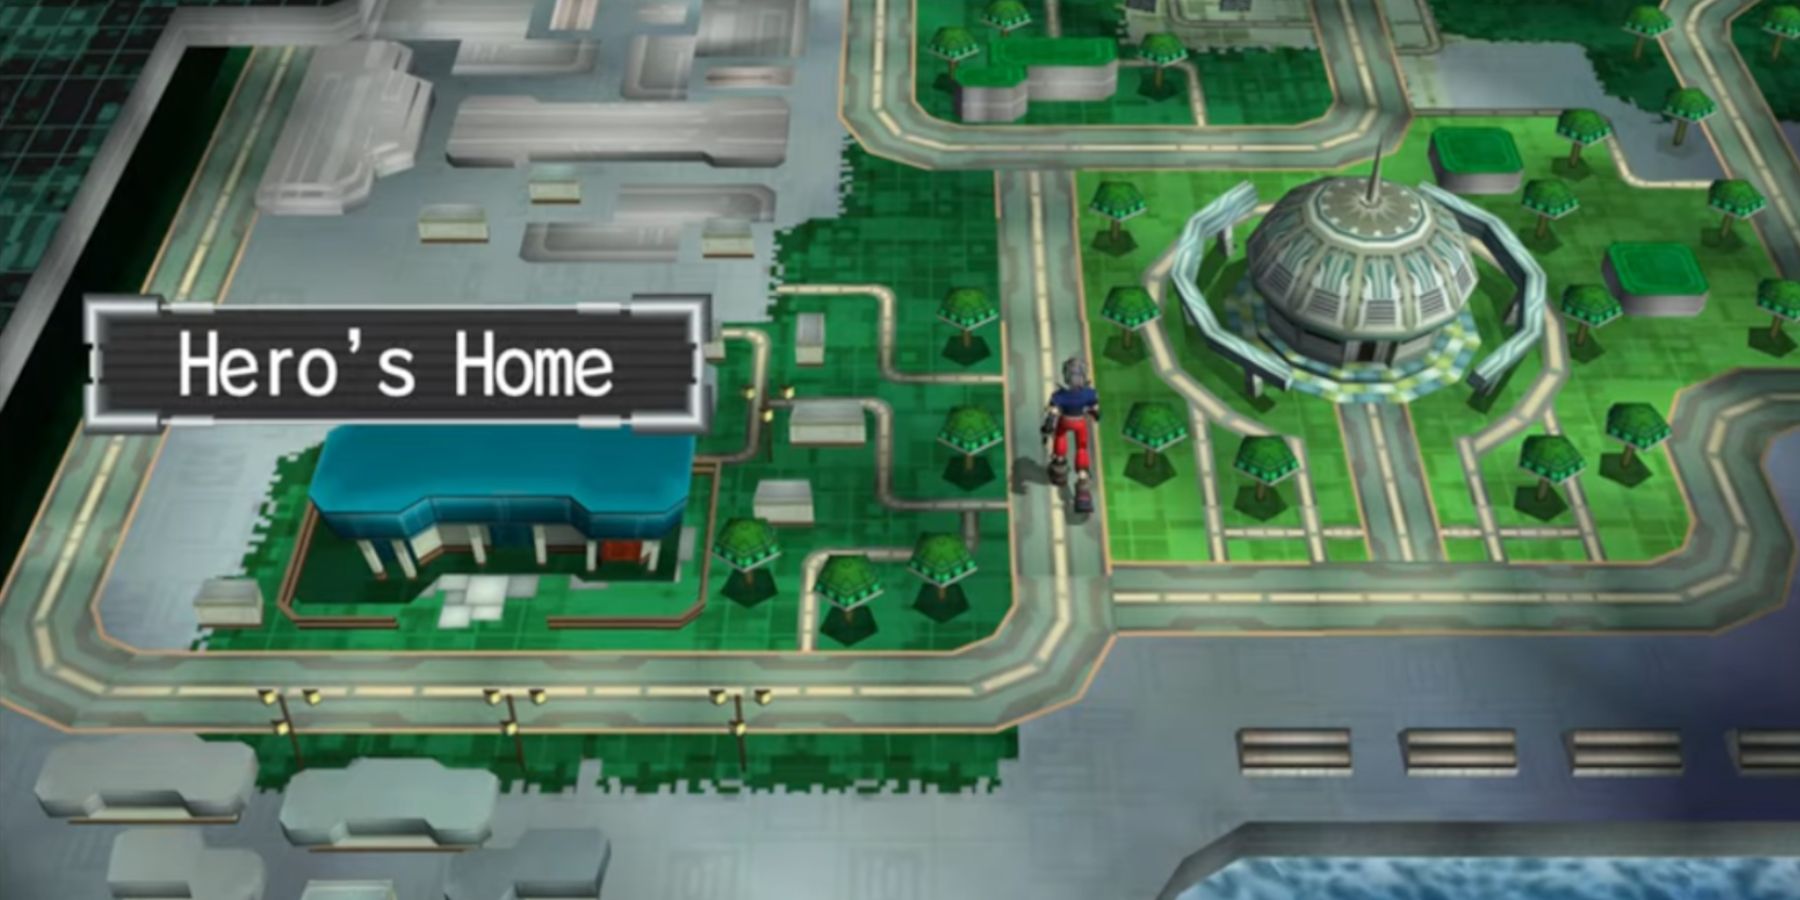 The main character in Custom Robo for the Nintendo GameCube explores the area surrounding his home.